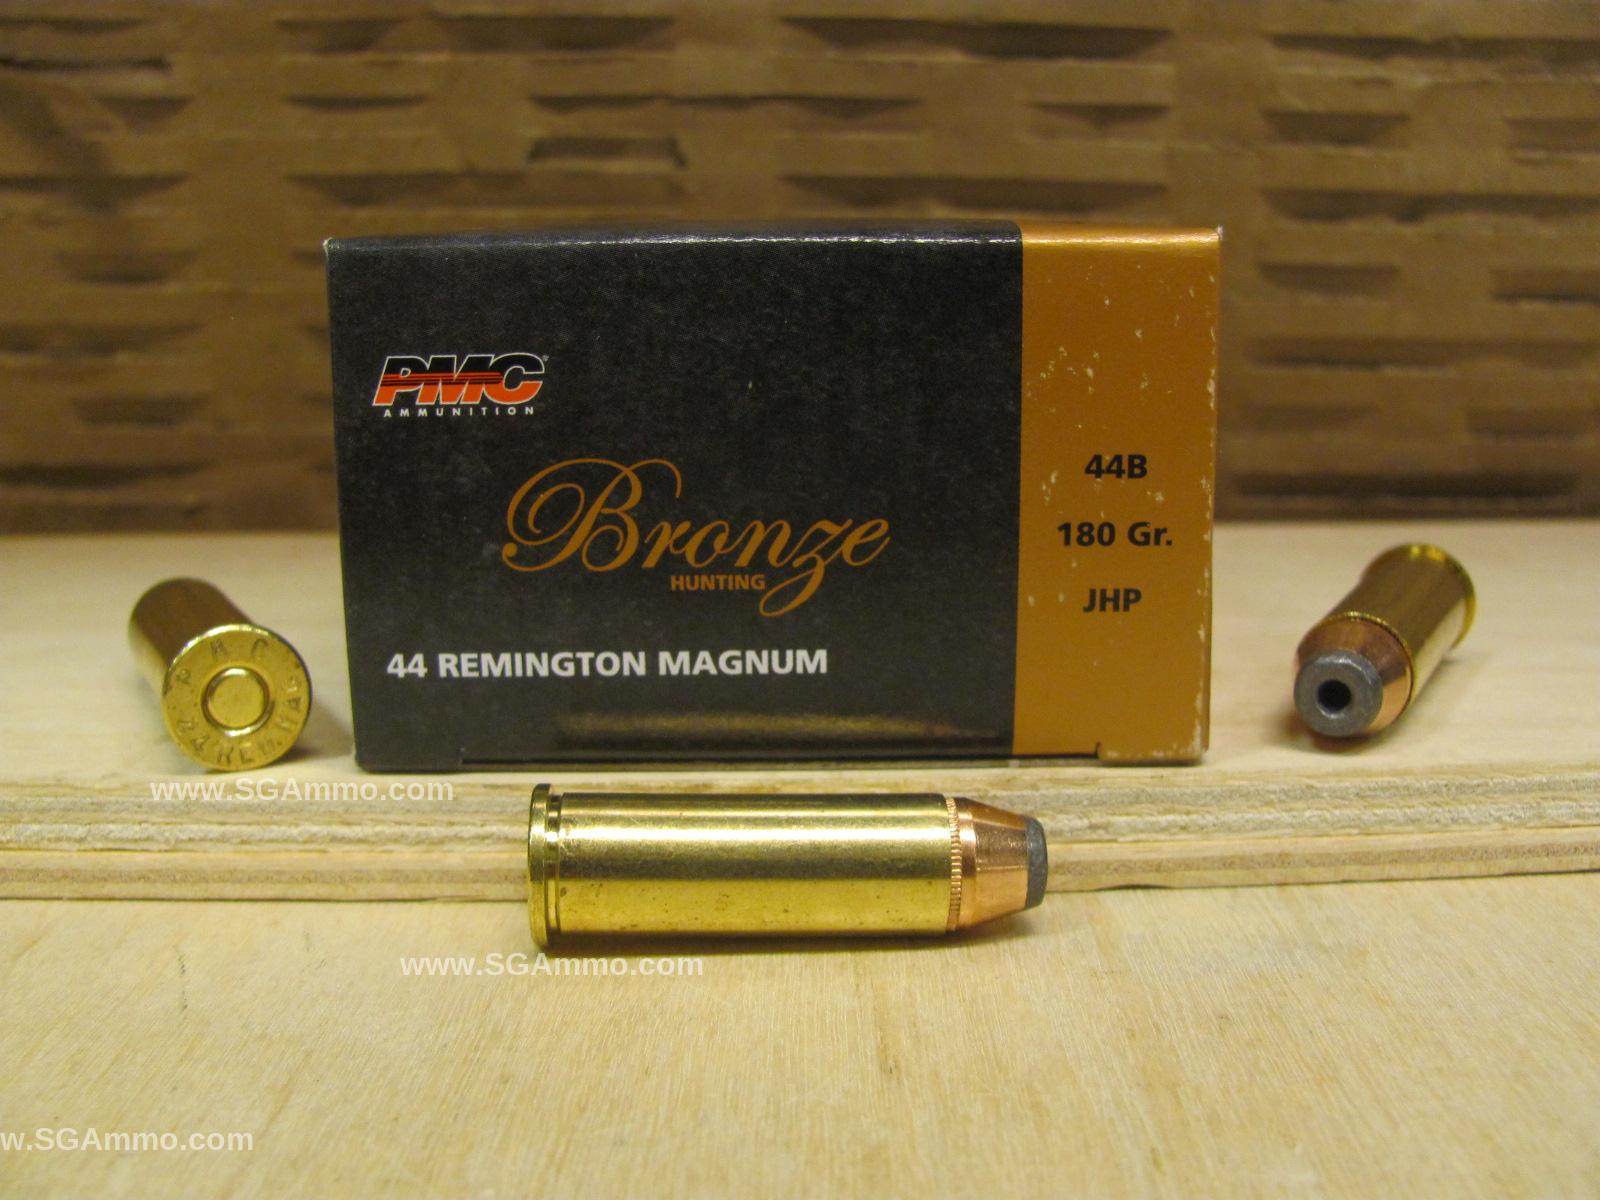 200 Round Plastic Can - 44 Magnum PMC 180 Grain JHP Ammo - 44B - Packed in Small Plastic Canister